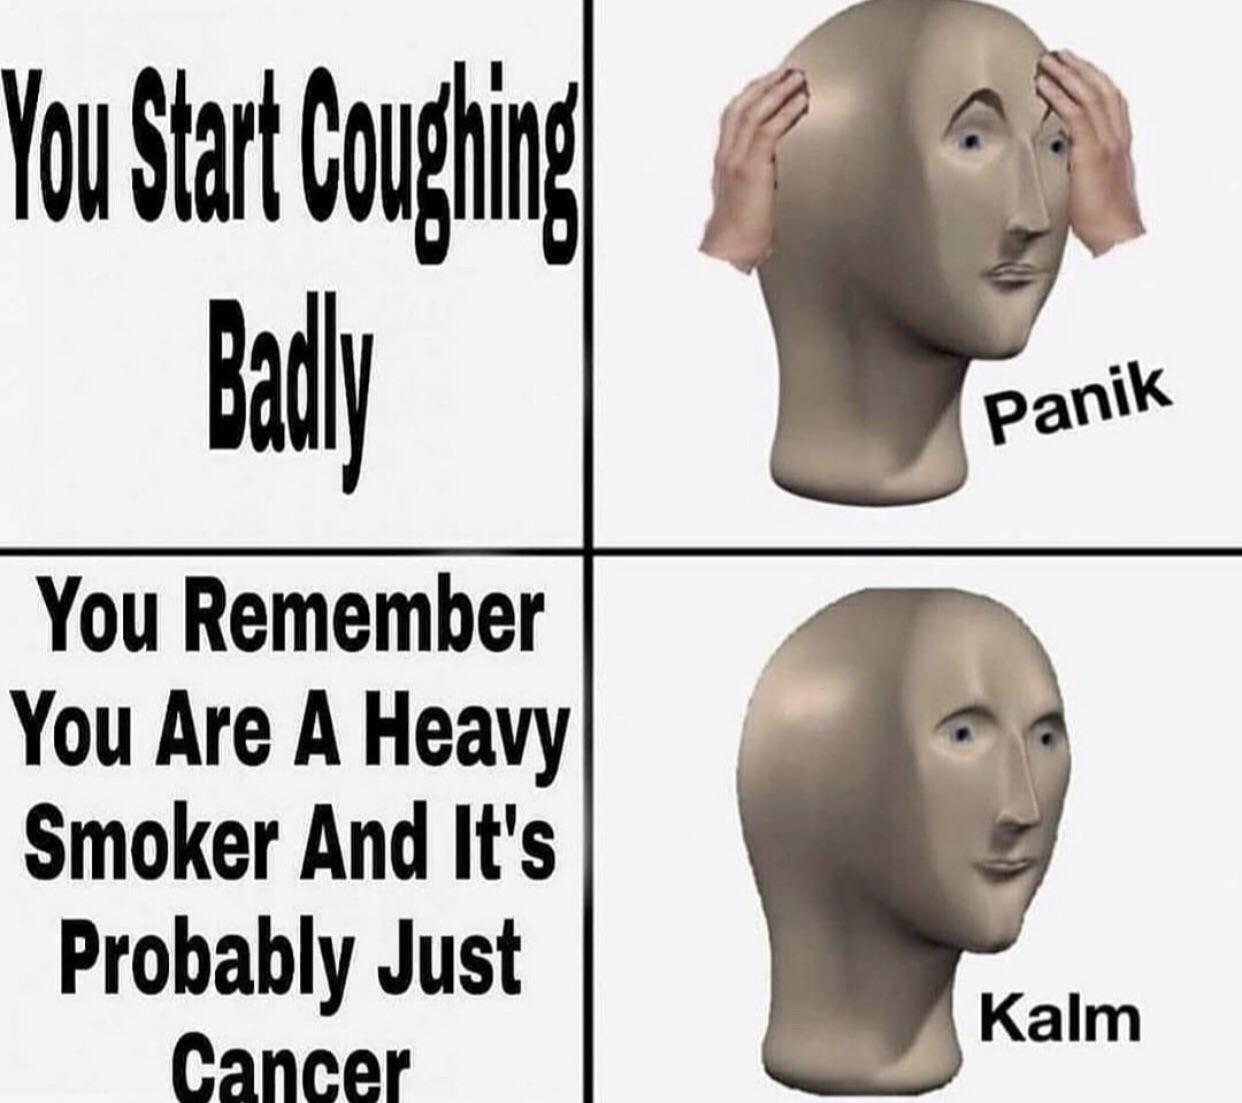 funny memes - jaw - You Start Coughing Badly Panik You Remember You Are A Heavy Smoker And It's Probably Just Cancer Kalm